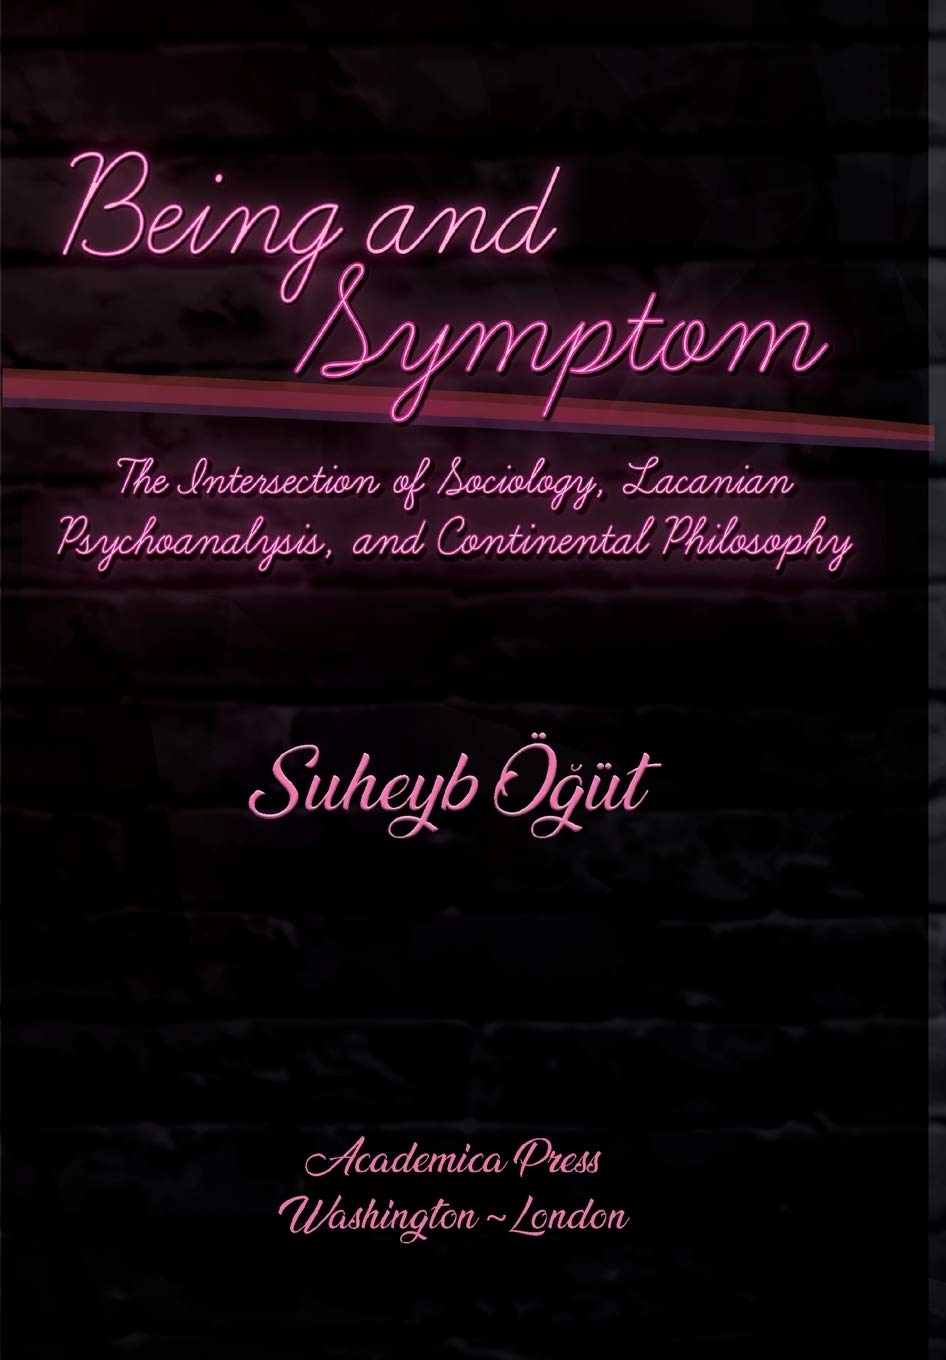 Being and Symptom